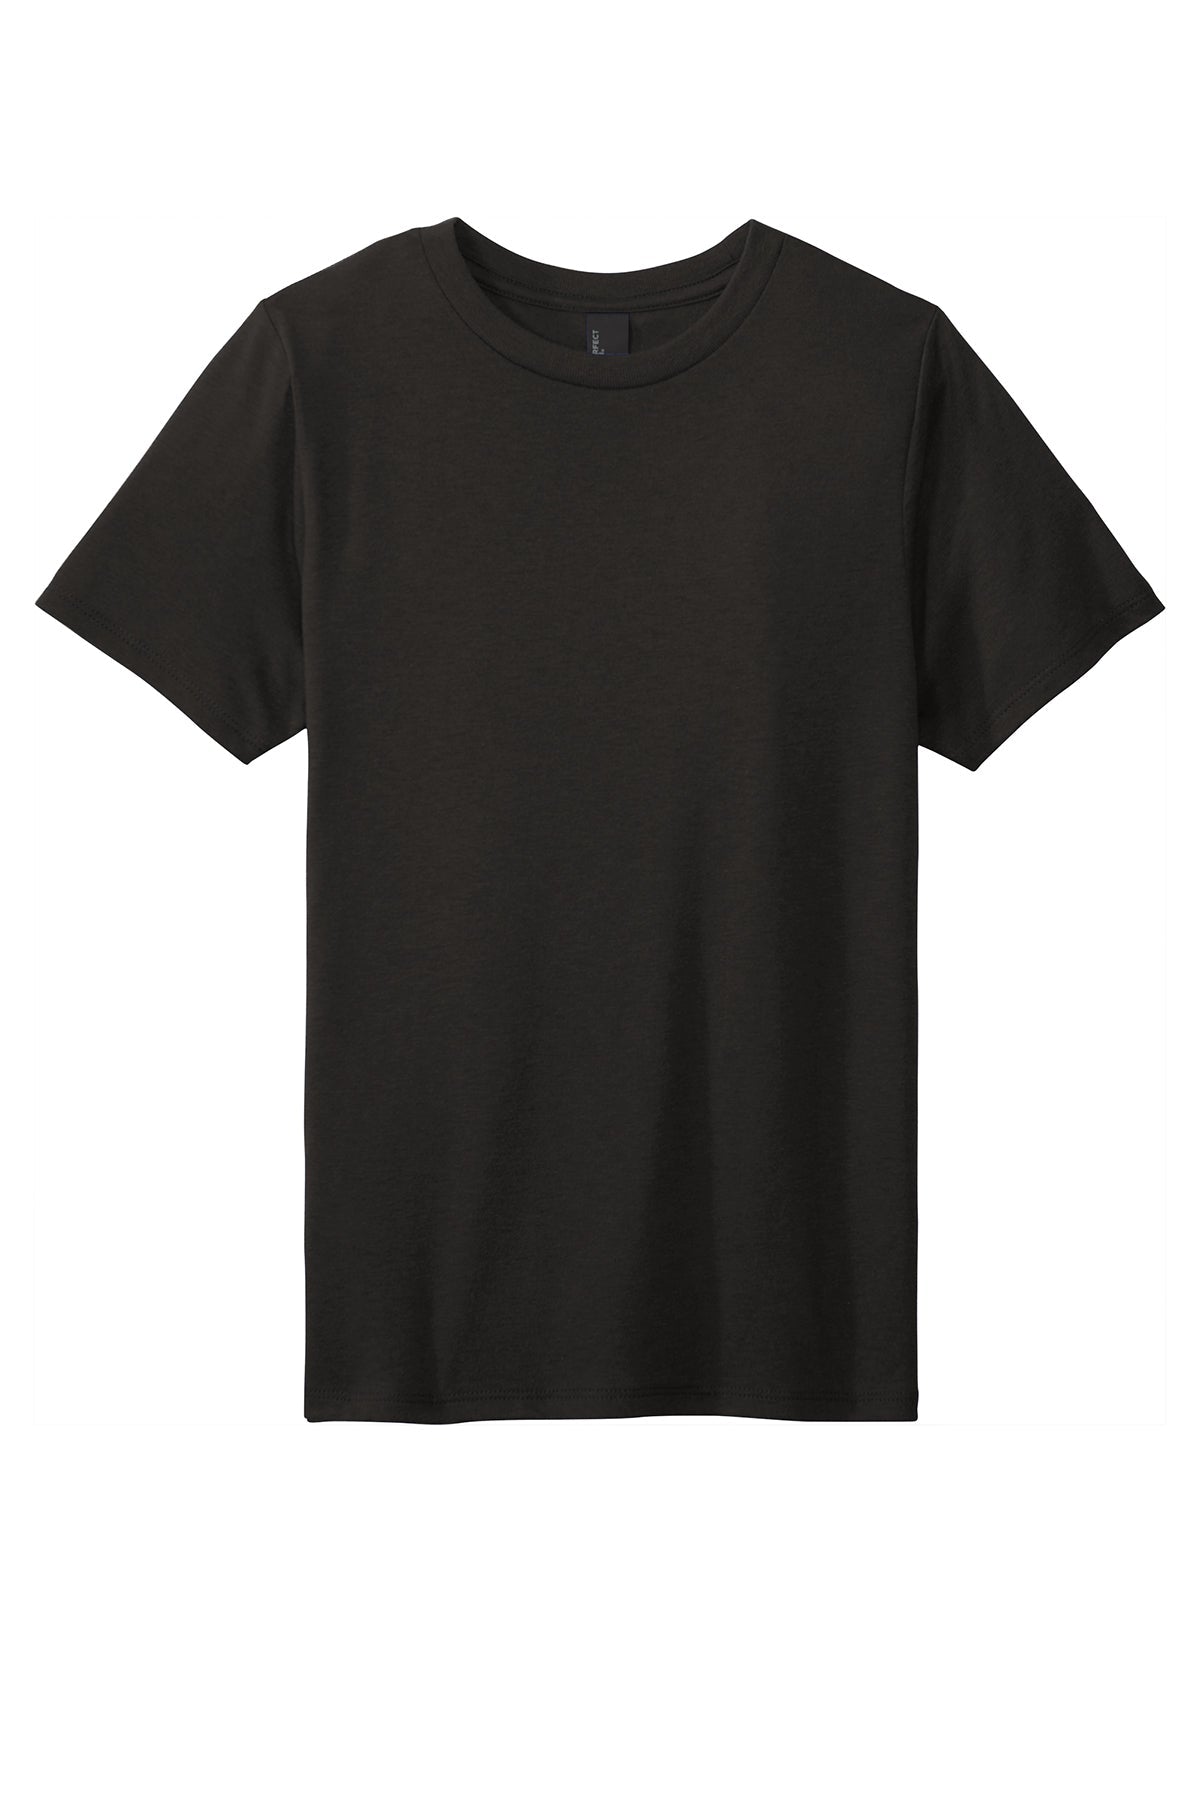 DT130Y District ® Youth Perfect Tri ® Tee